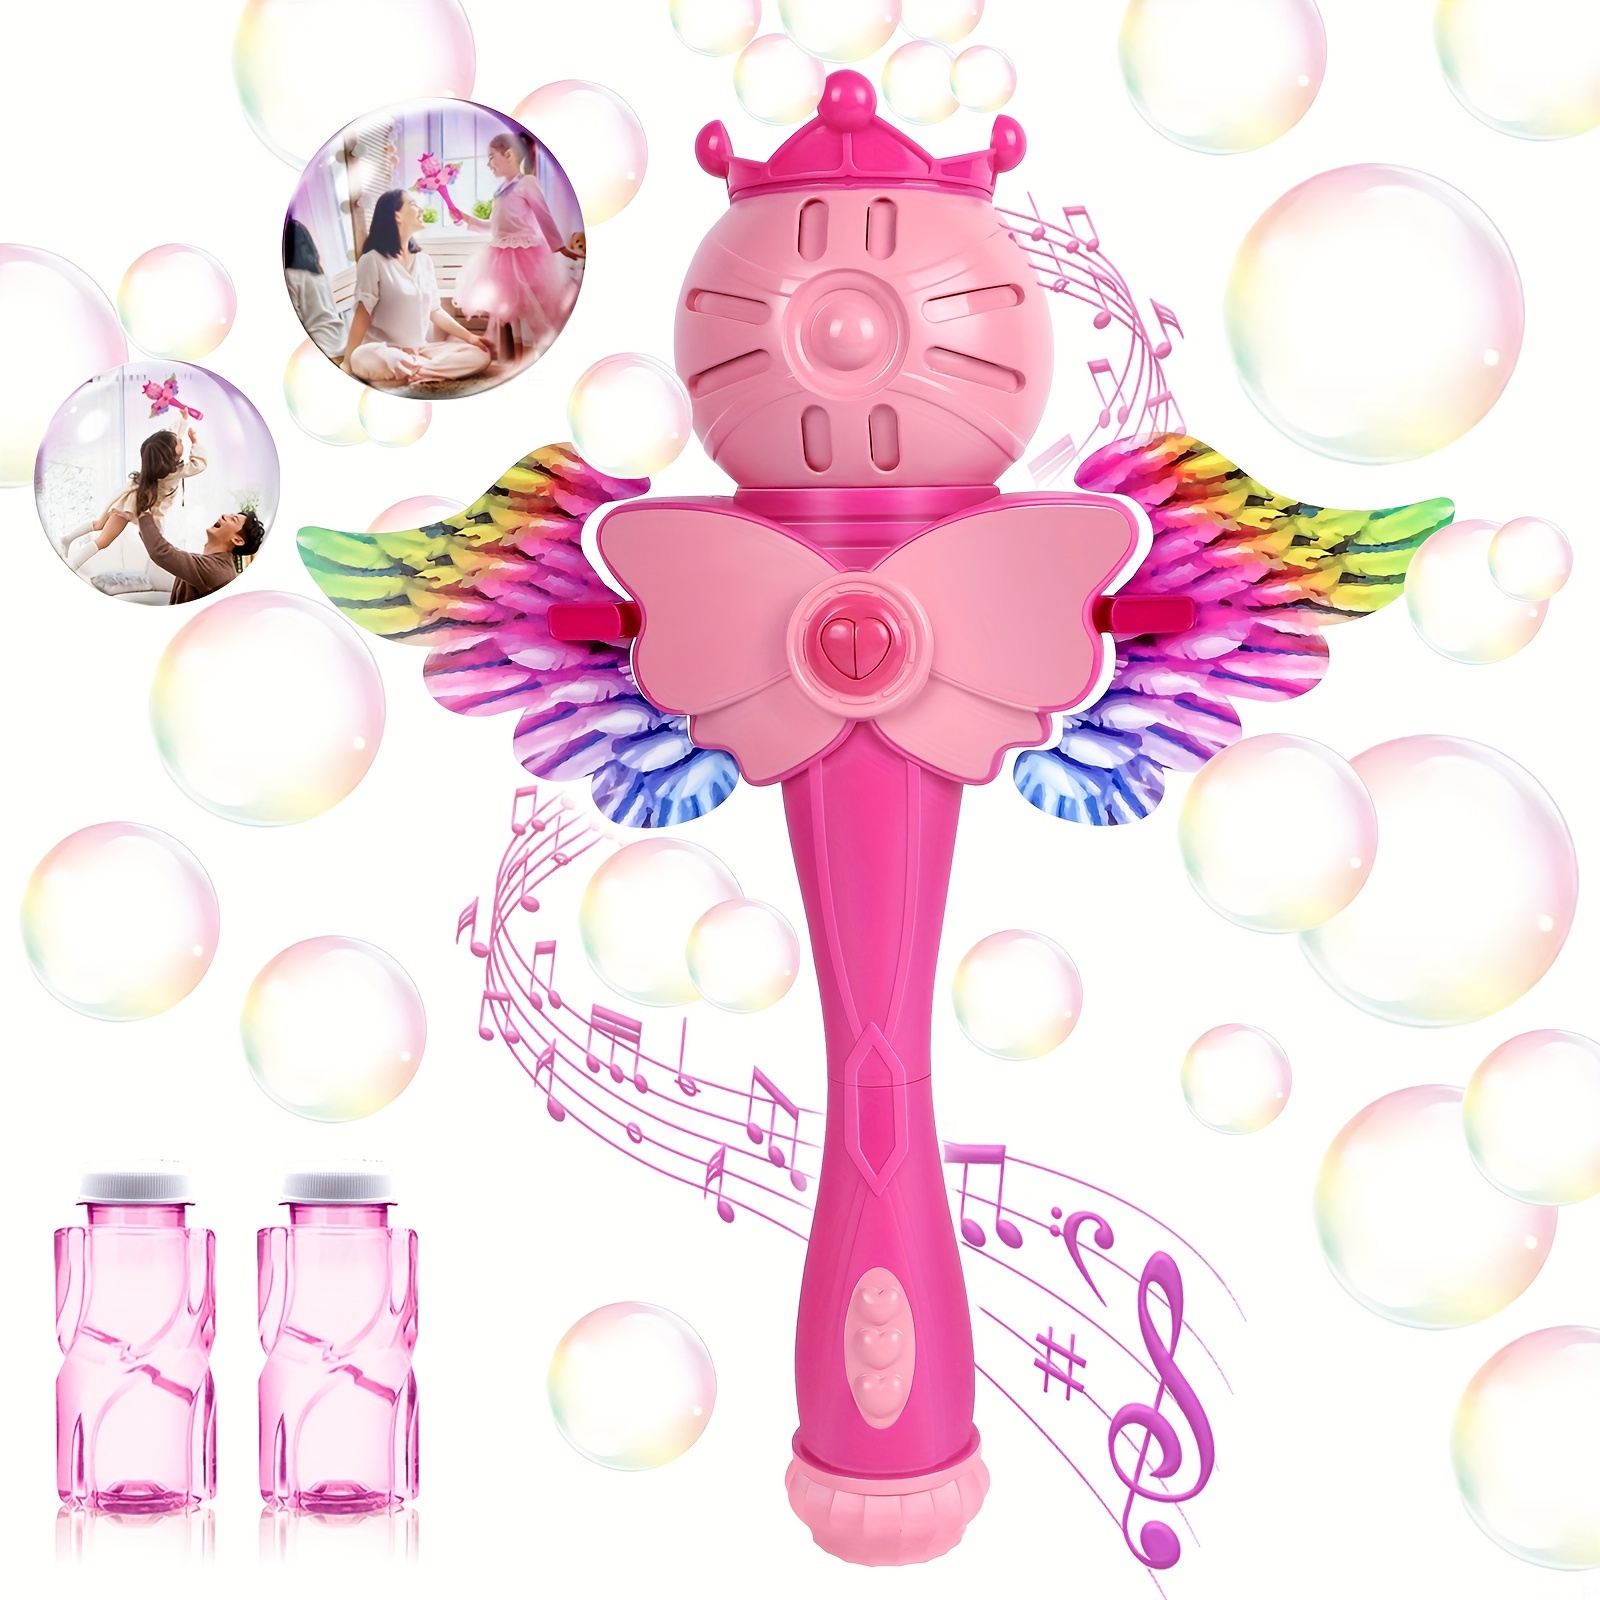 Bubble Toy for Kids, Automatic Electric Turn Eyes Toys Bubble Wand Maker,  Musical&Light Up Bubble Toys for Toddlers Outdoor, 3 4 5 6 7 8 Year Old  Girl